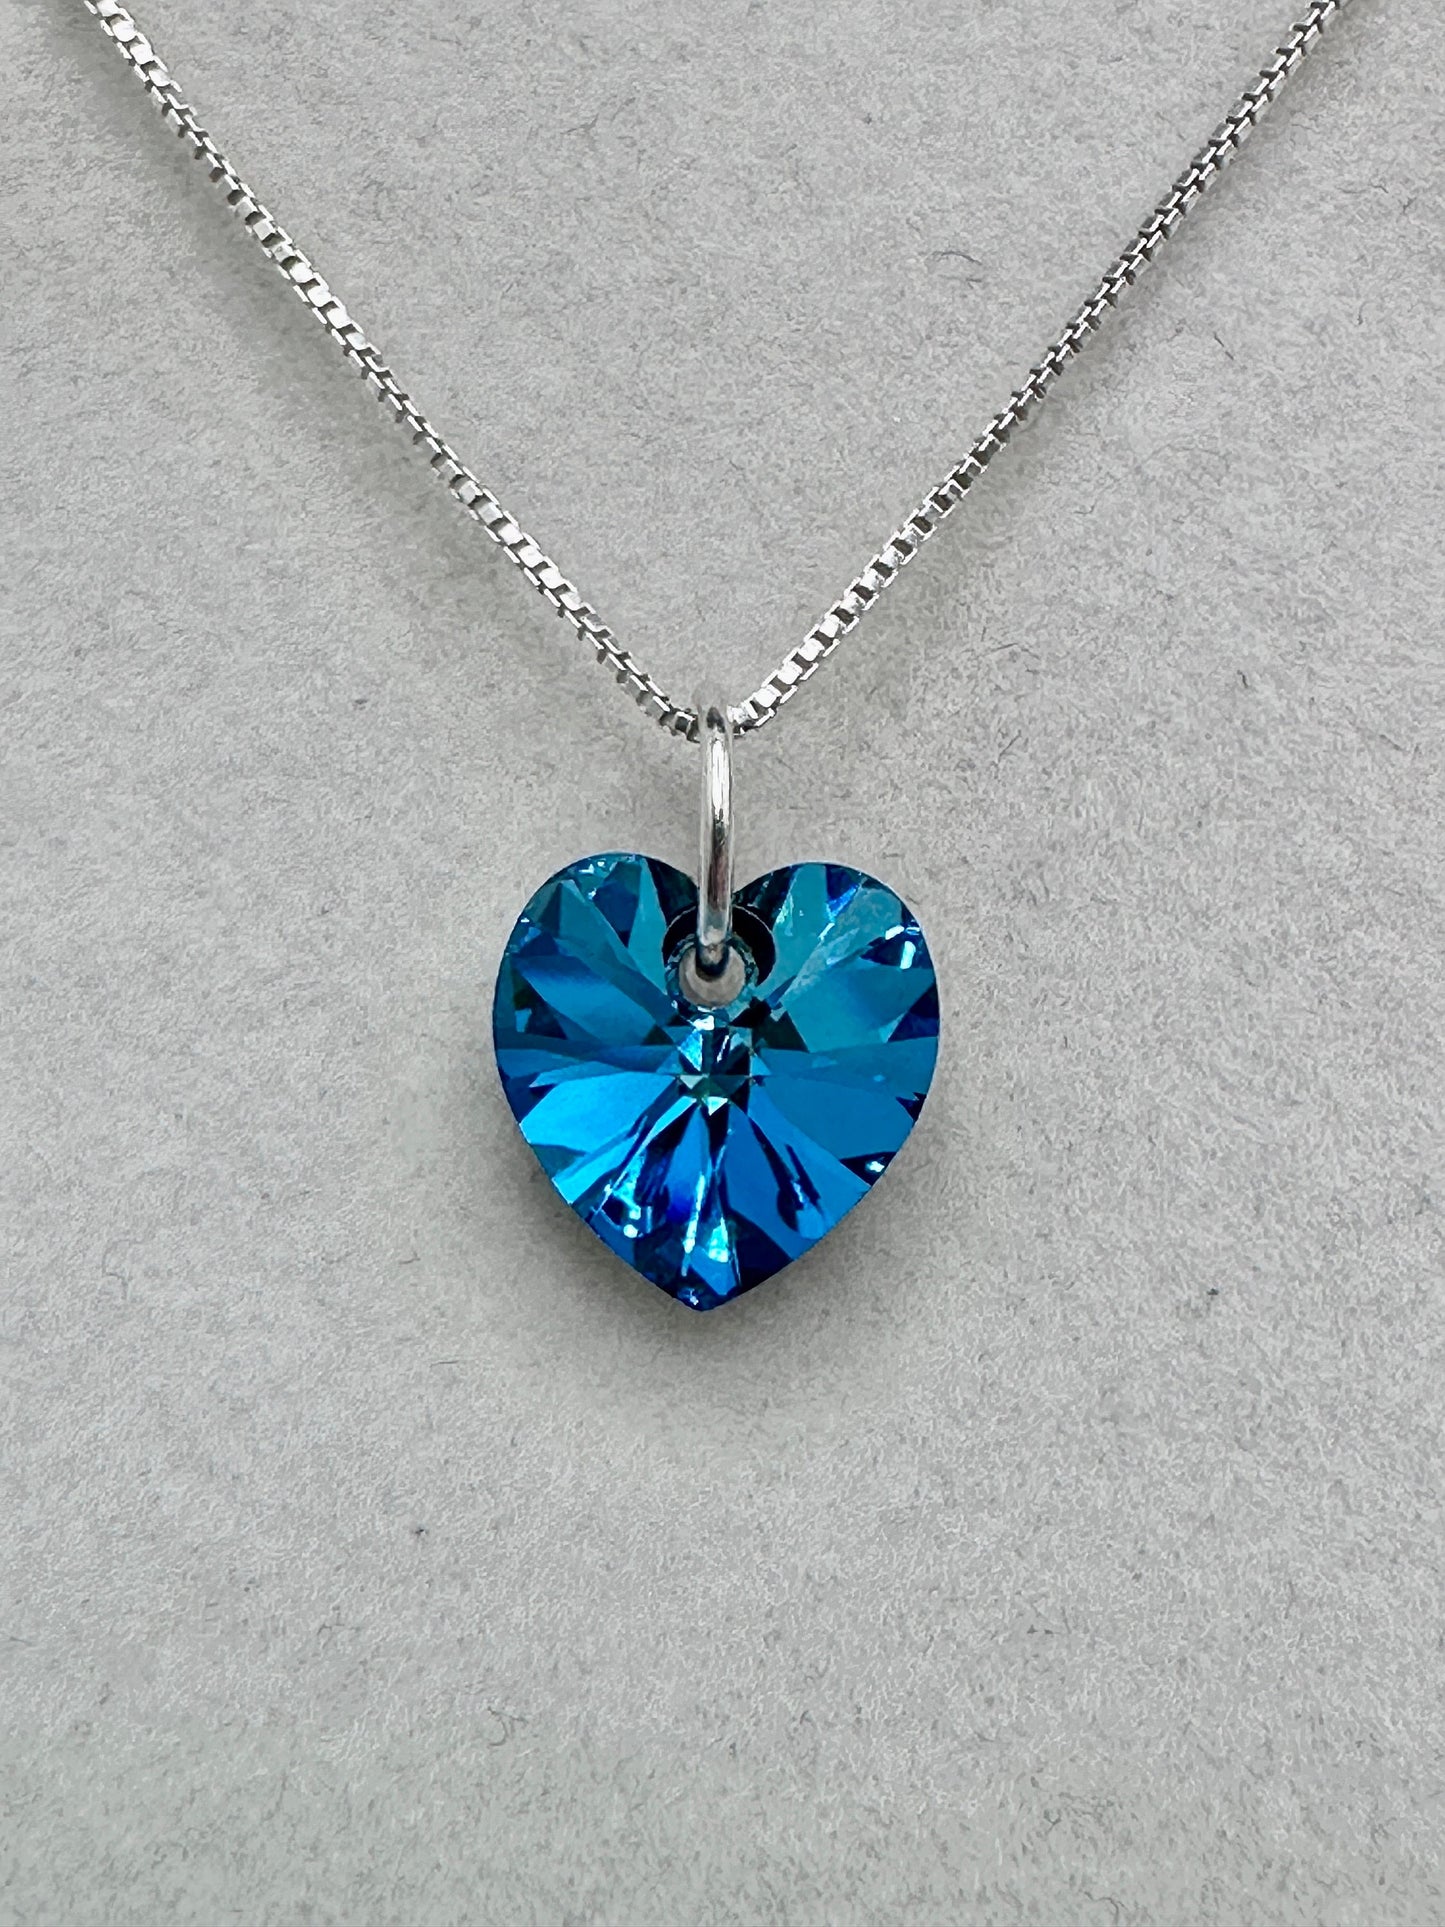 Swarovski Teal / Green Heart Pendant Necklace on 18” Sterling Silver Chain